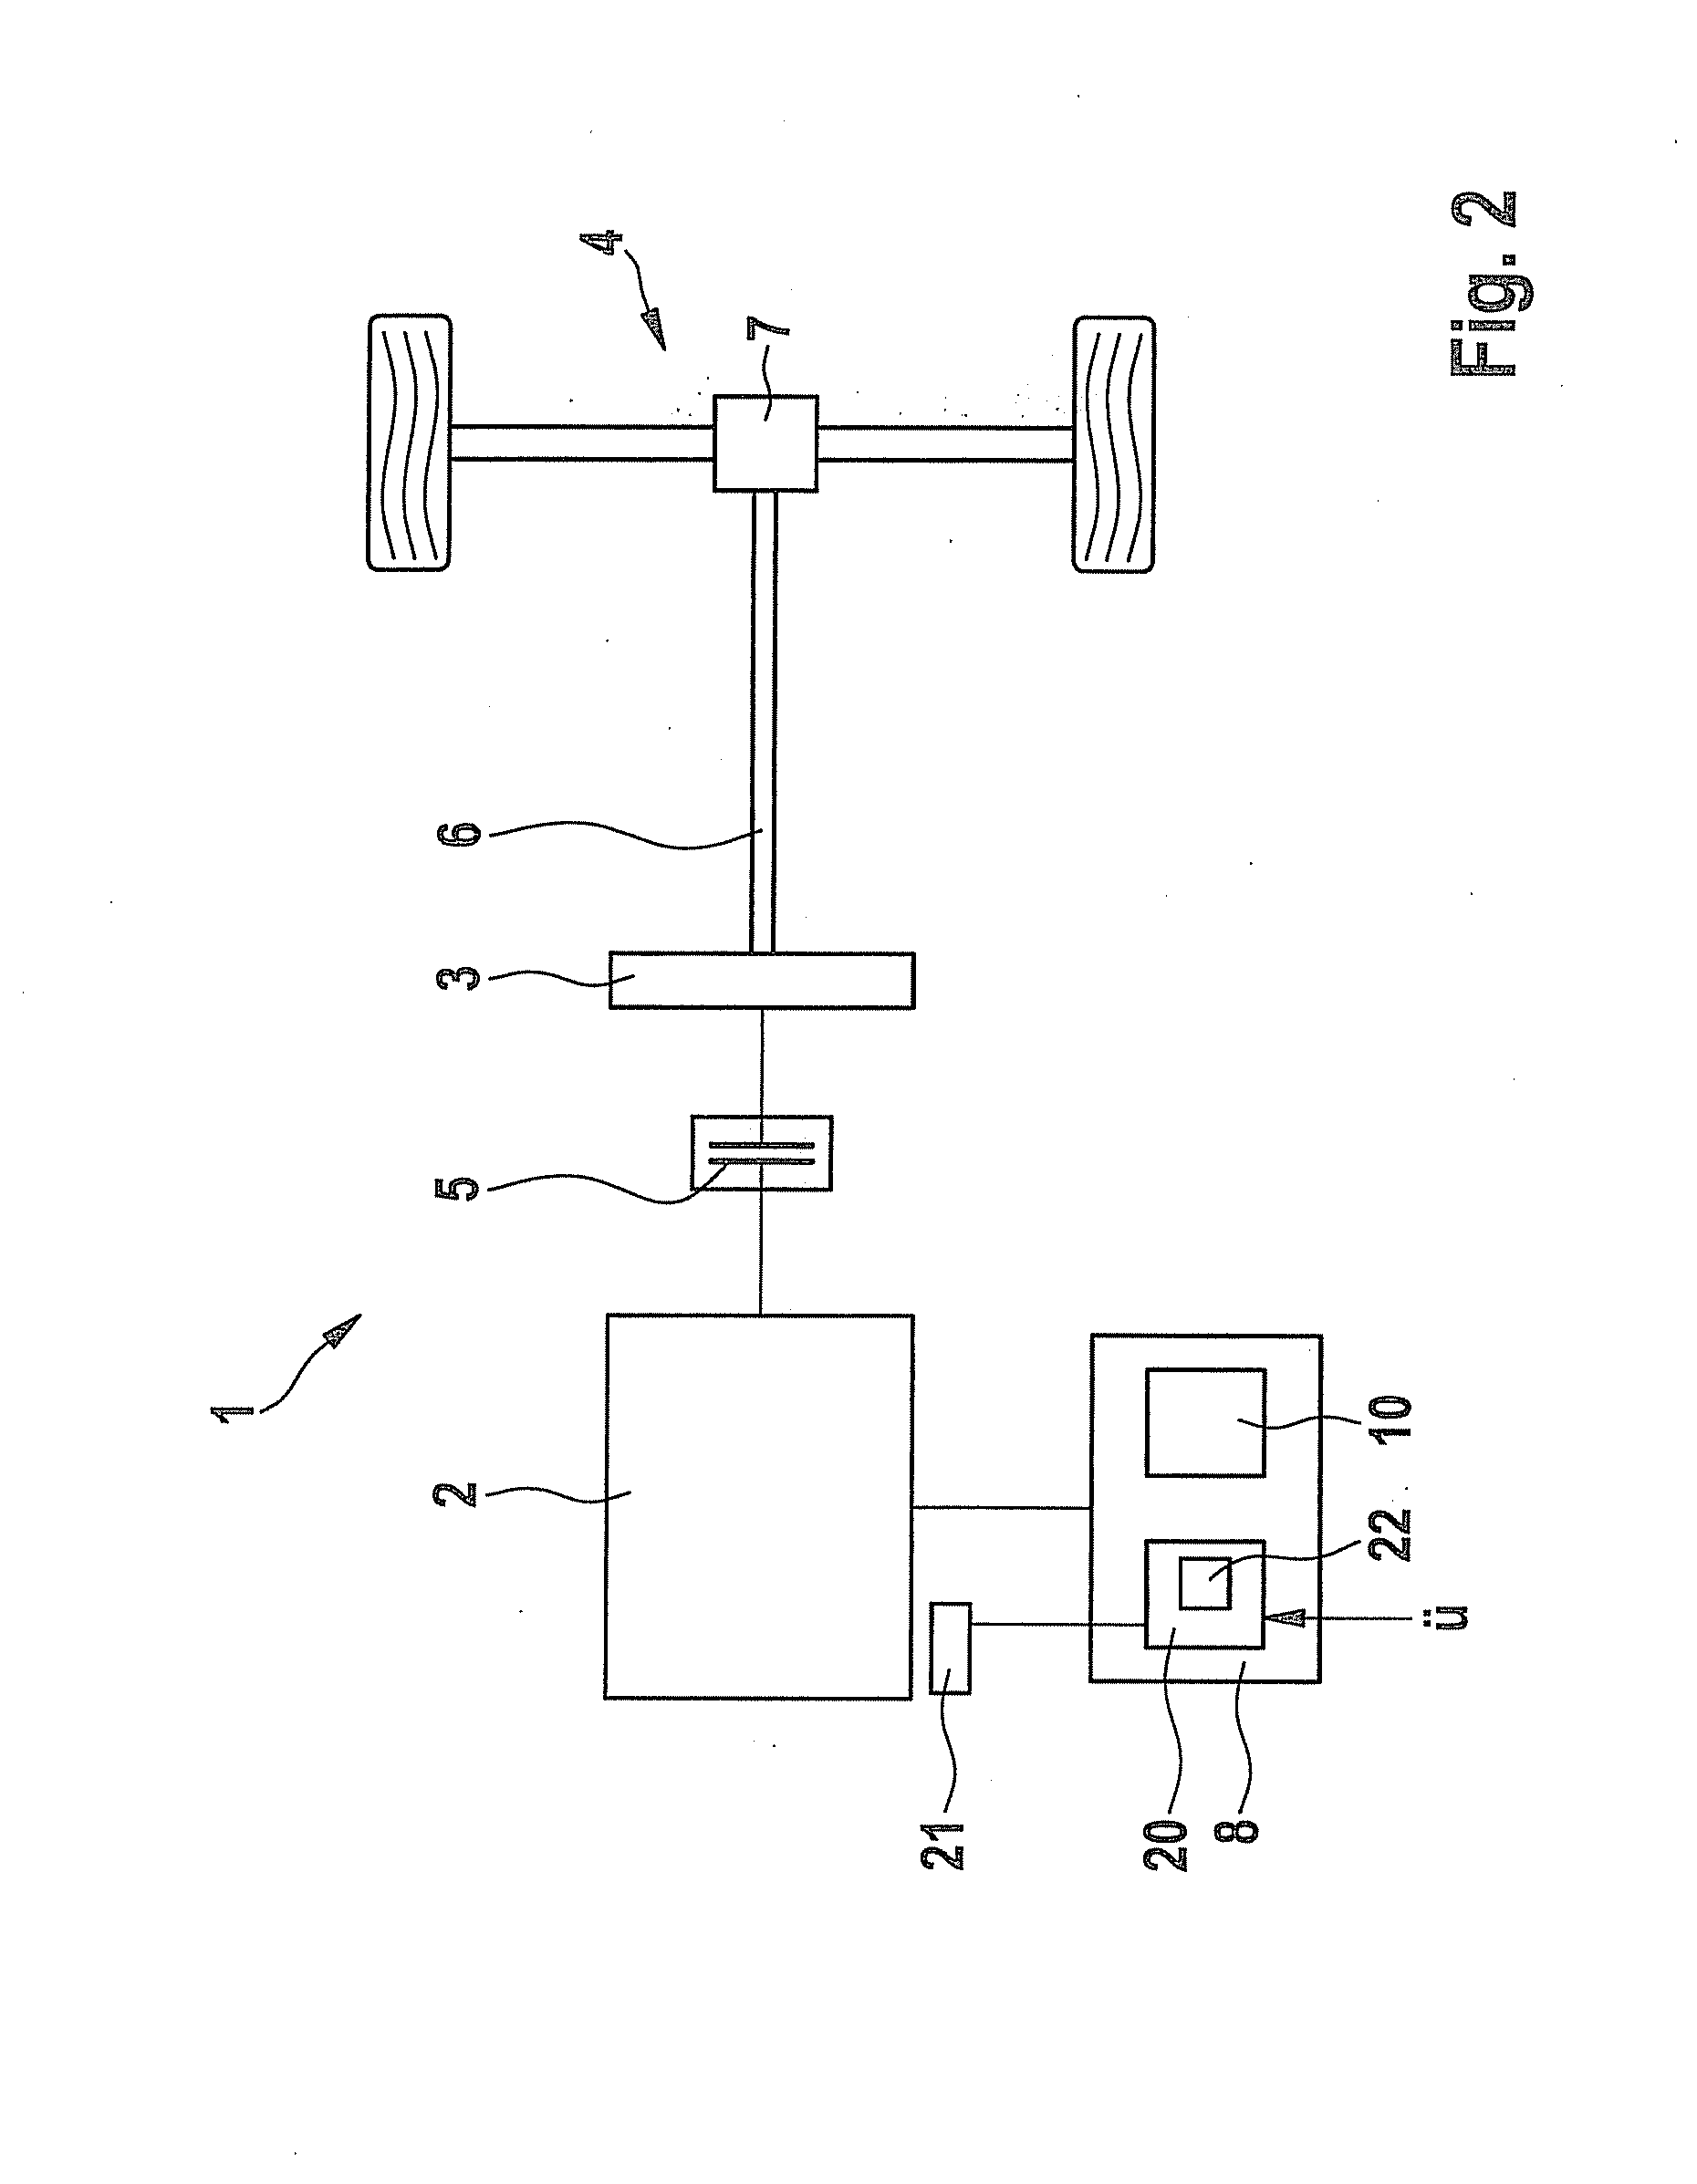 Method and system for controlling an electrical machine in a drivetrain of a motor vehicle